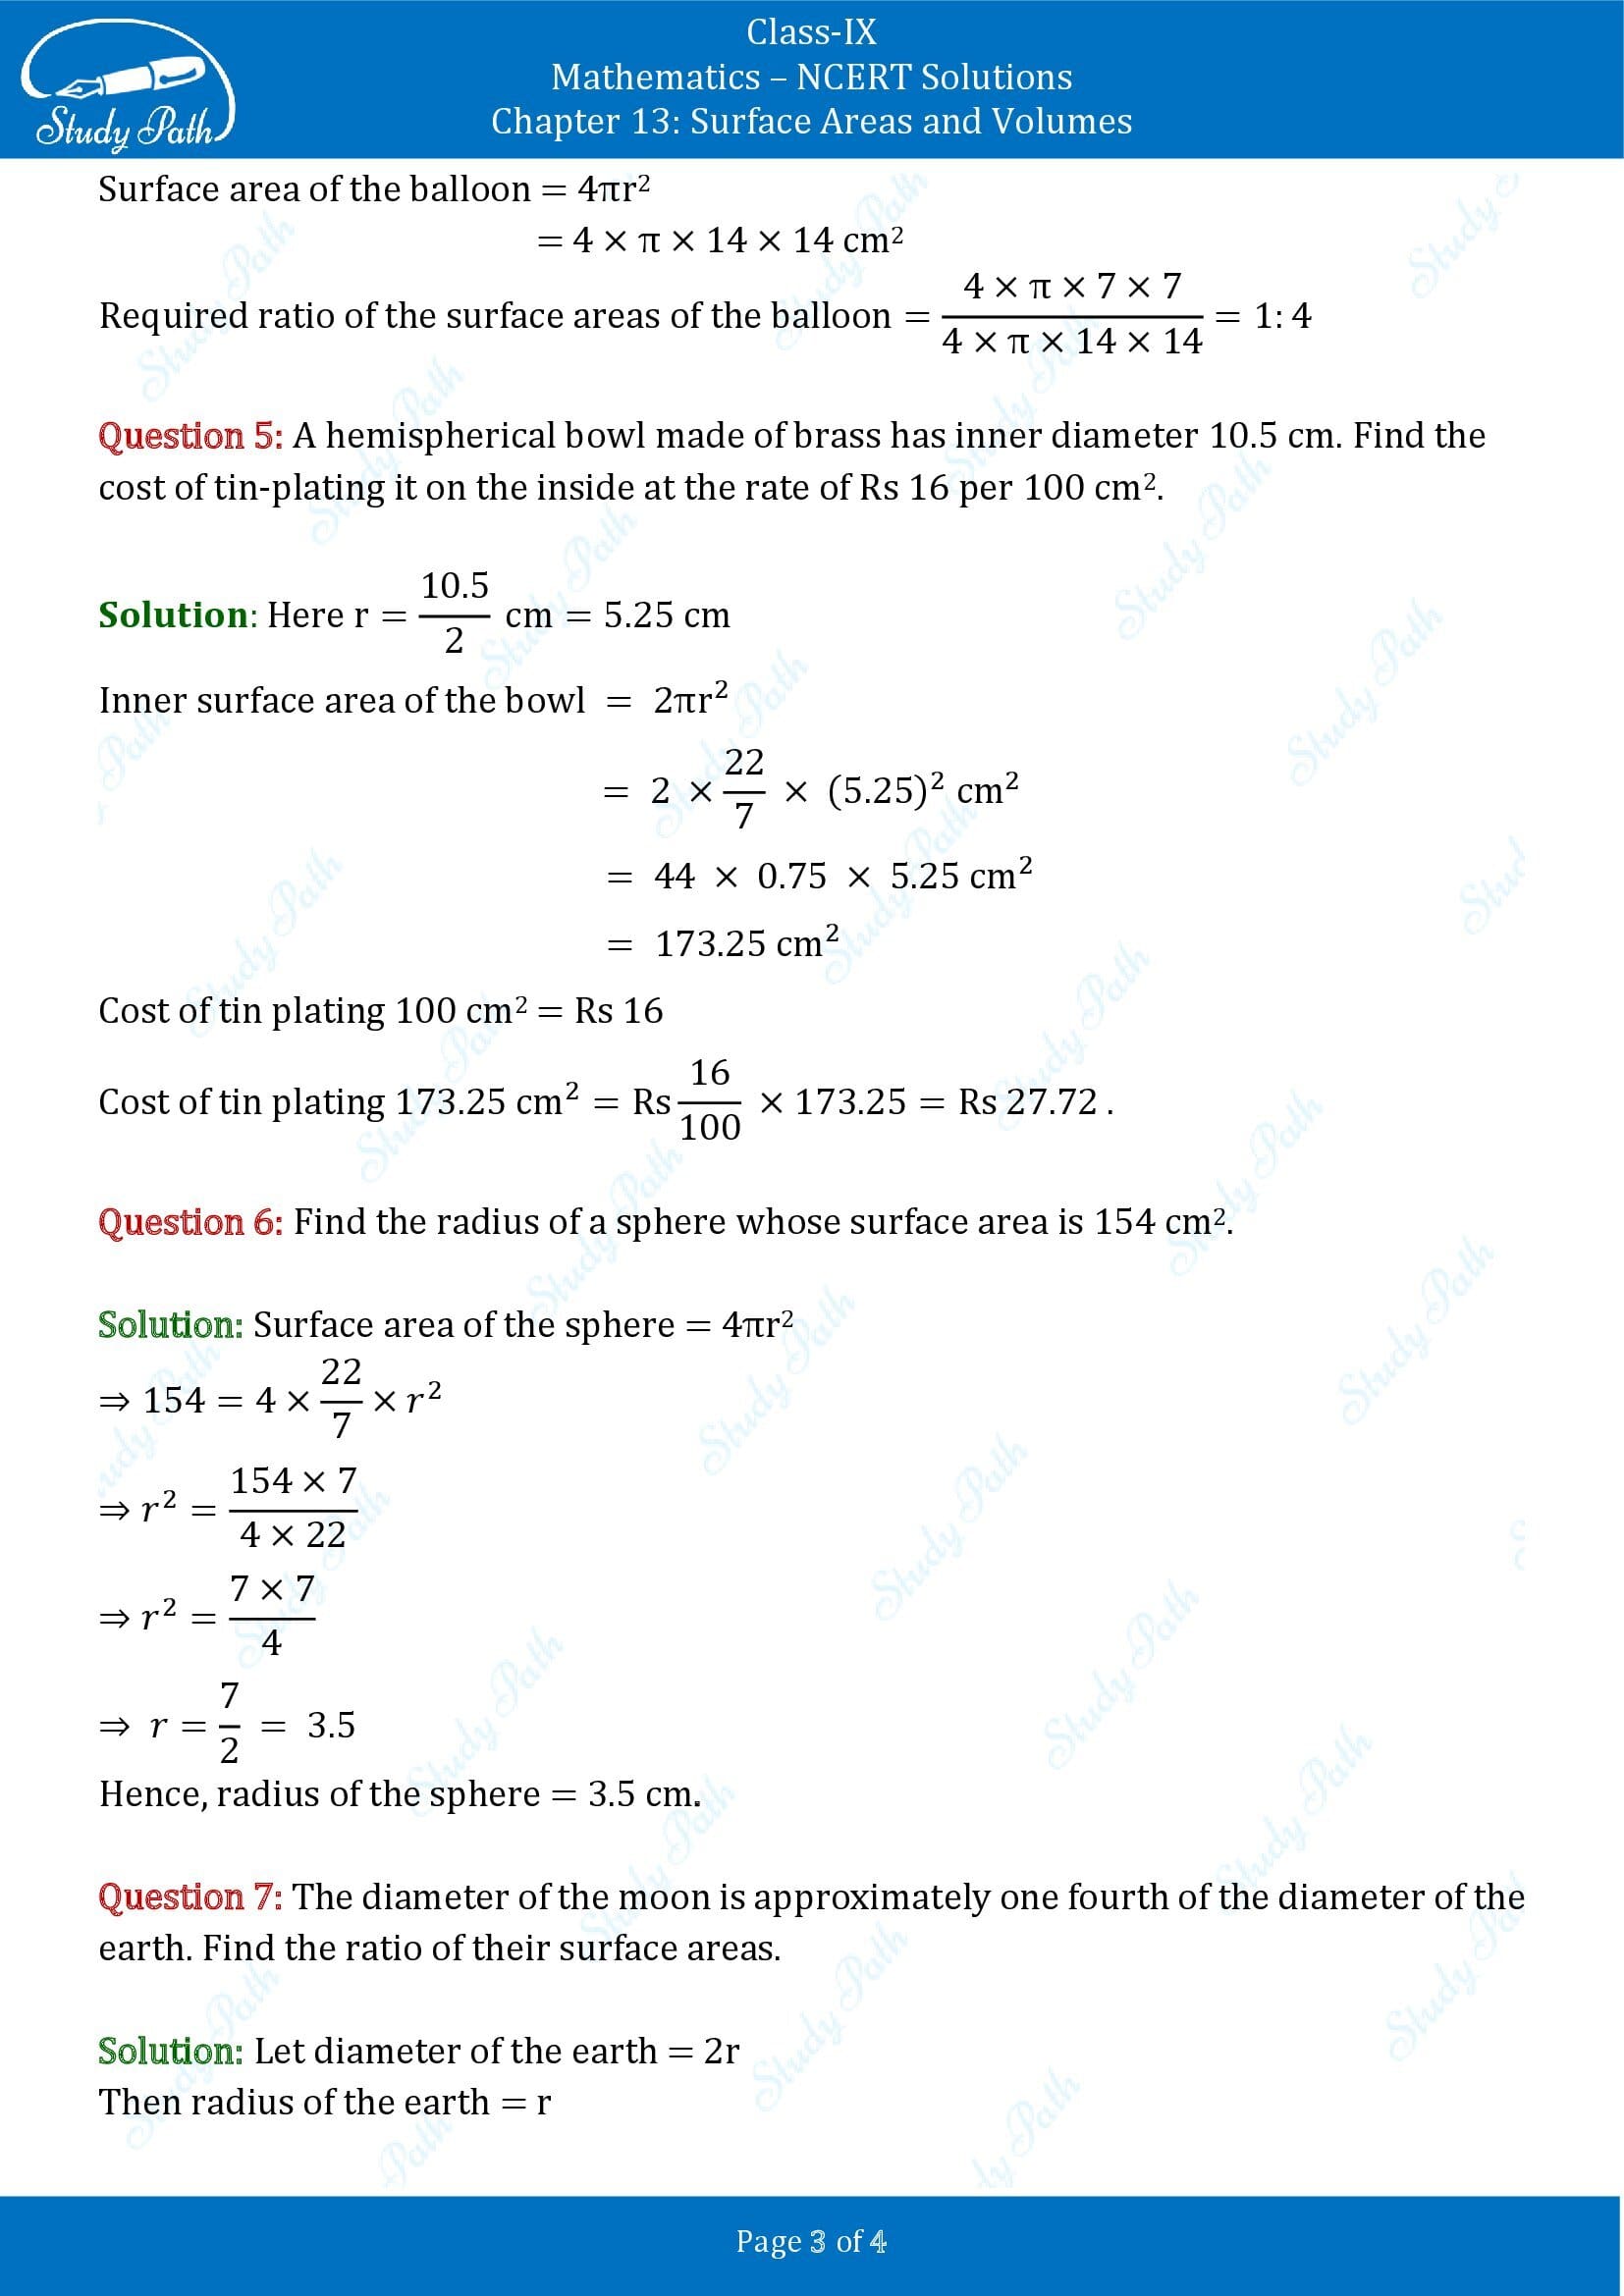 NCERT Solutions for Class 9 Maths Chapter 13 Surface Areas and Volumes Exercise 13.4 00003